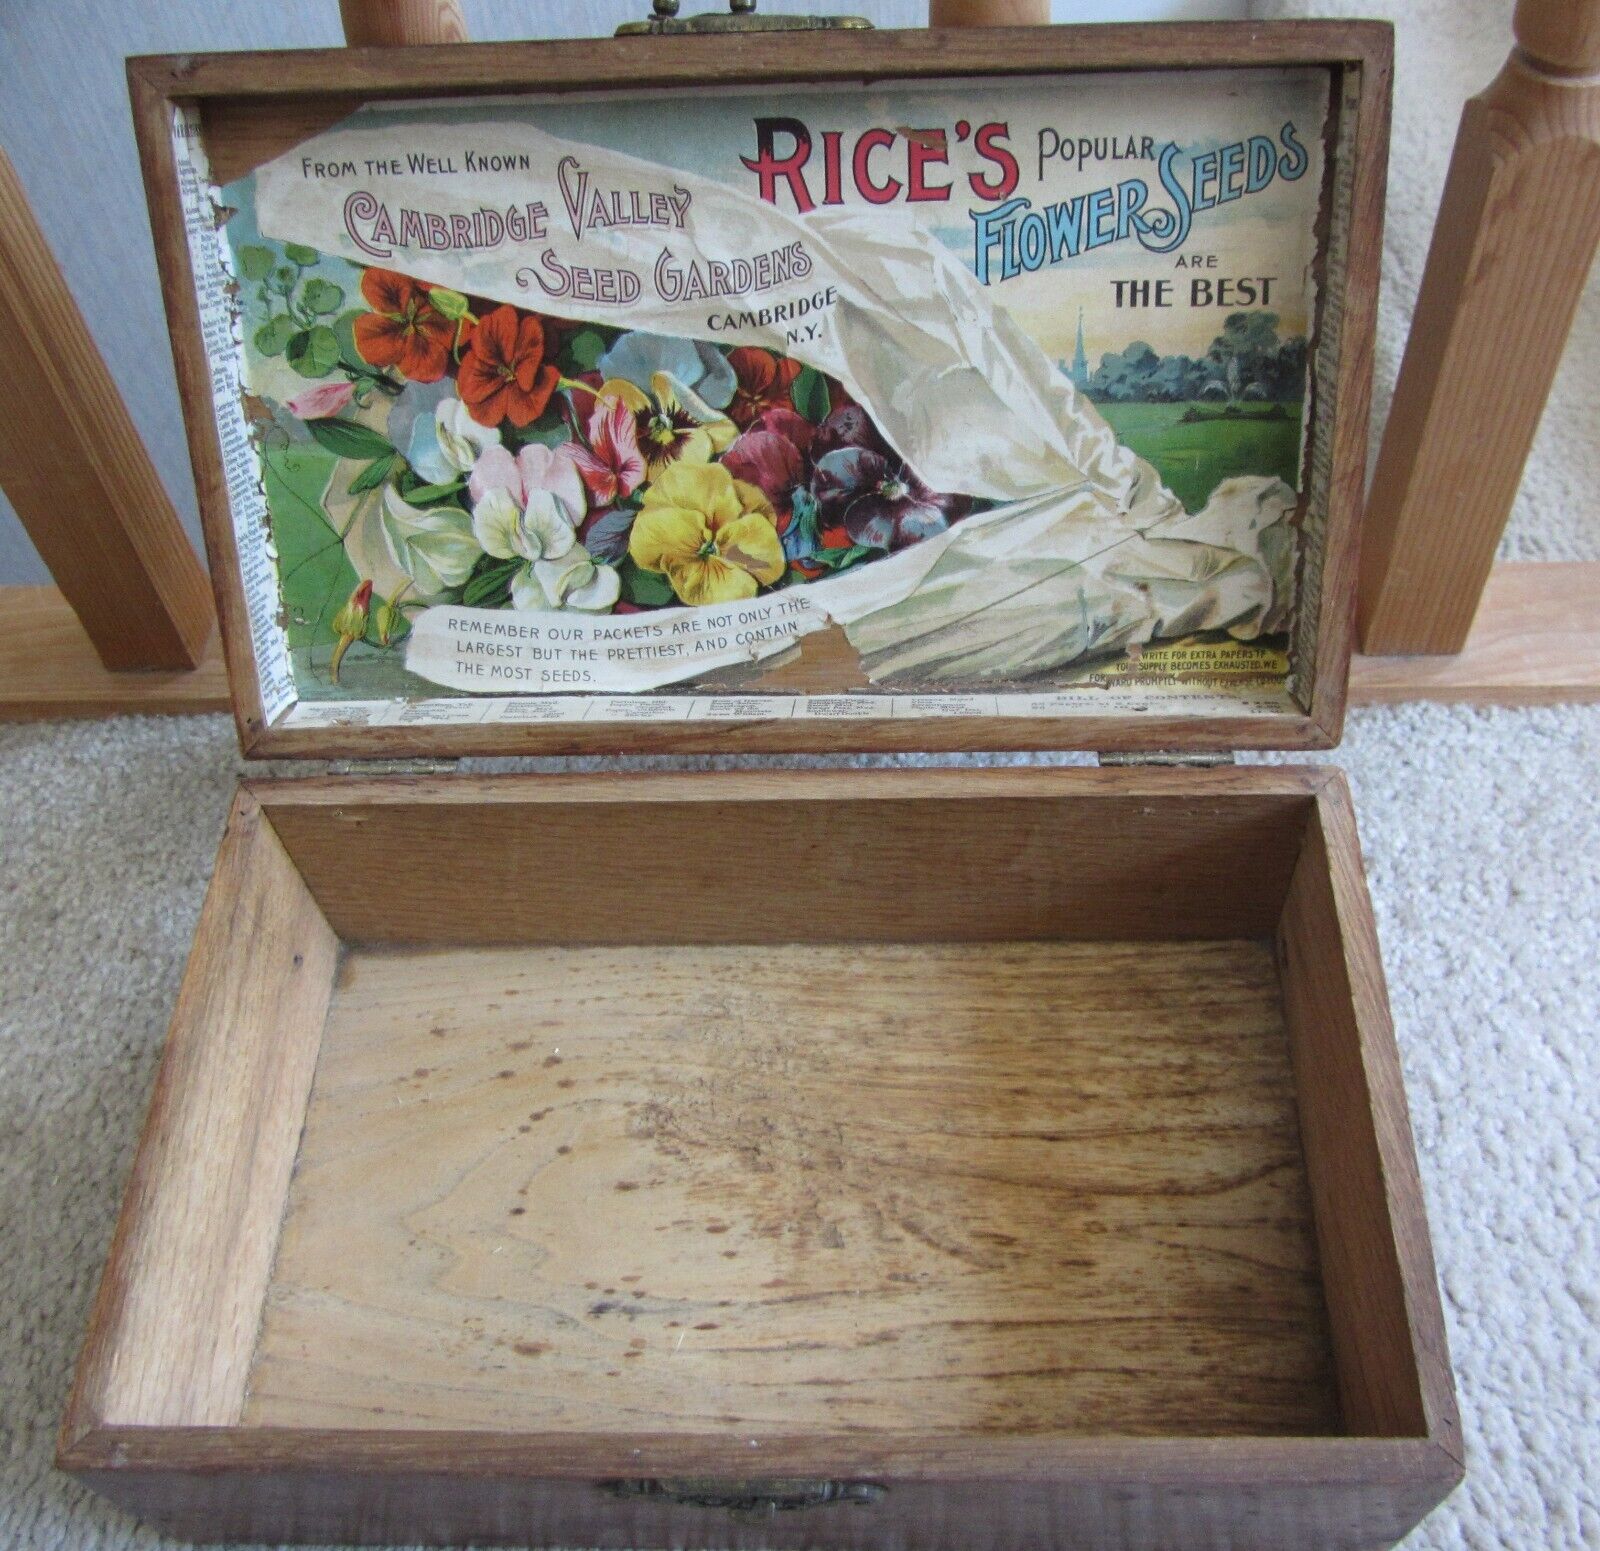 RICE'S Flower Seed Box - Cambridge N.Y. - Advertising Seed Box - Great Graphics